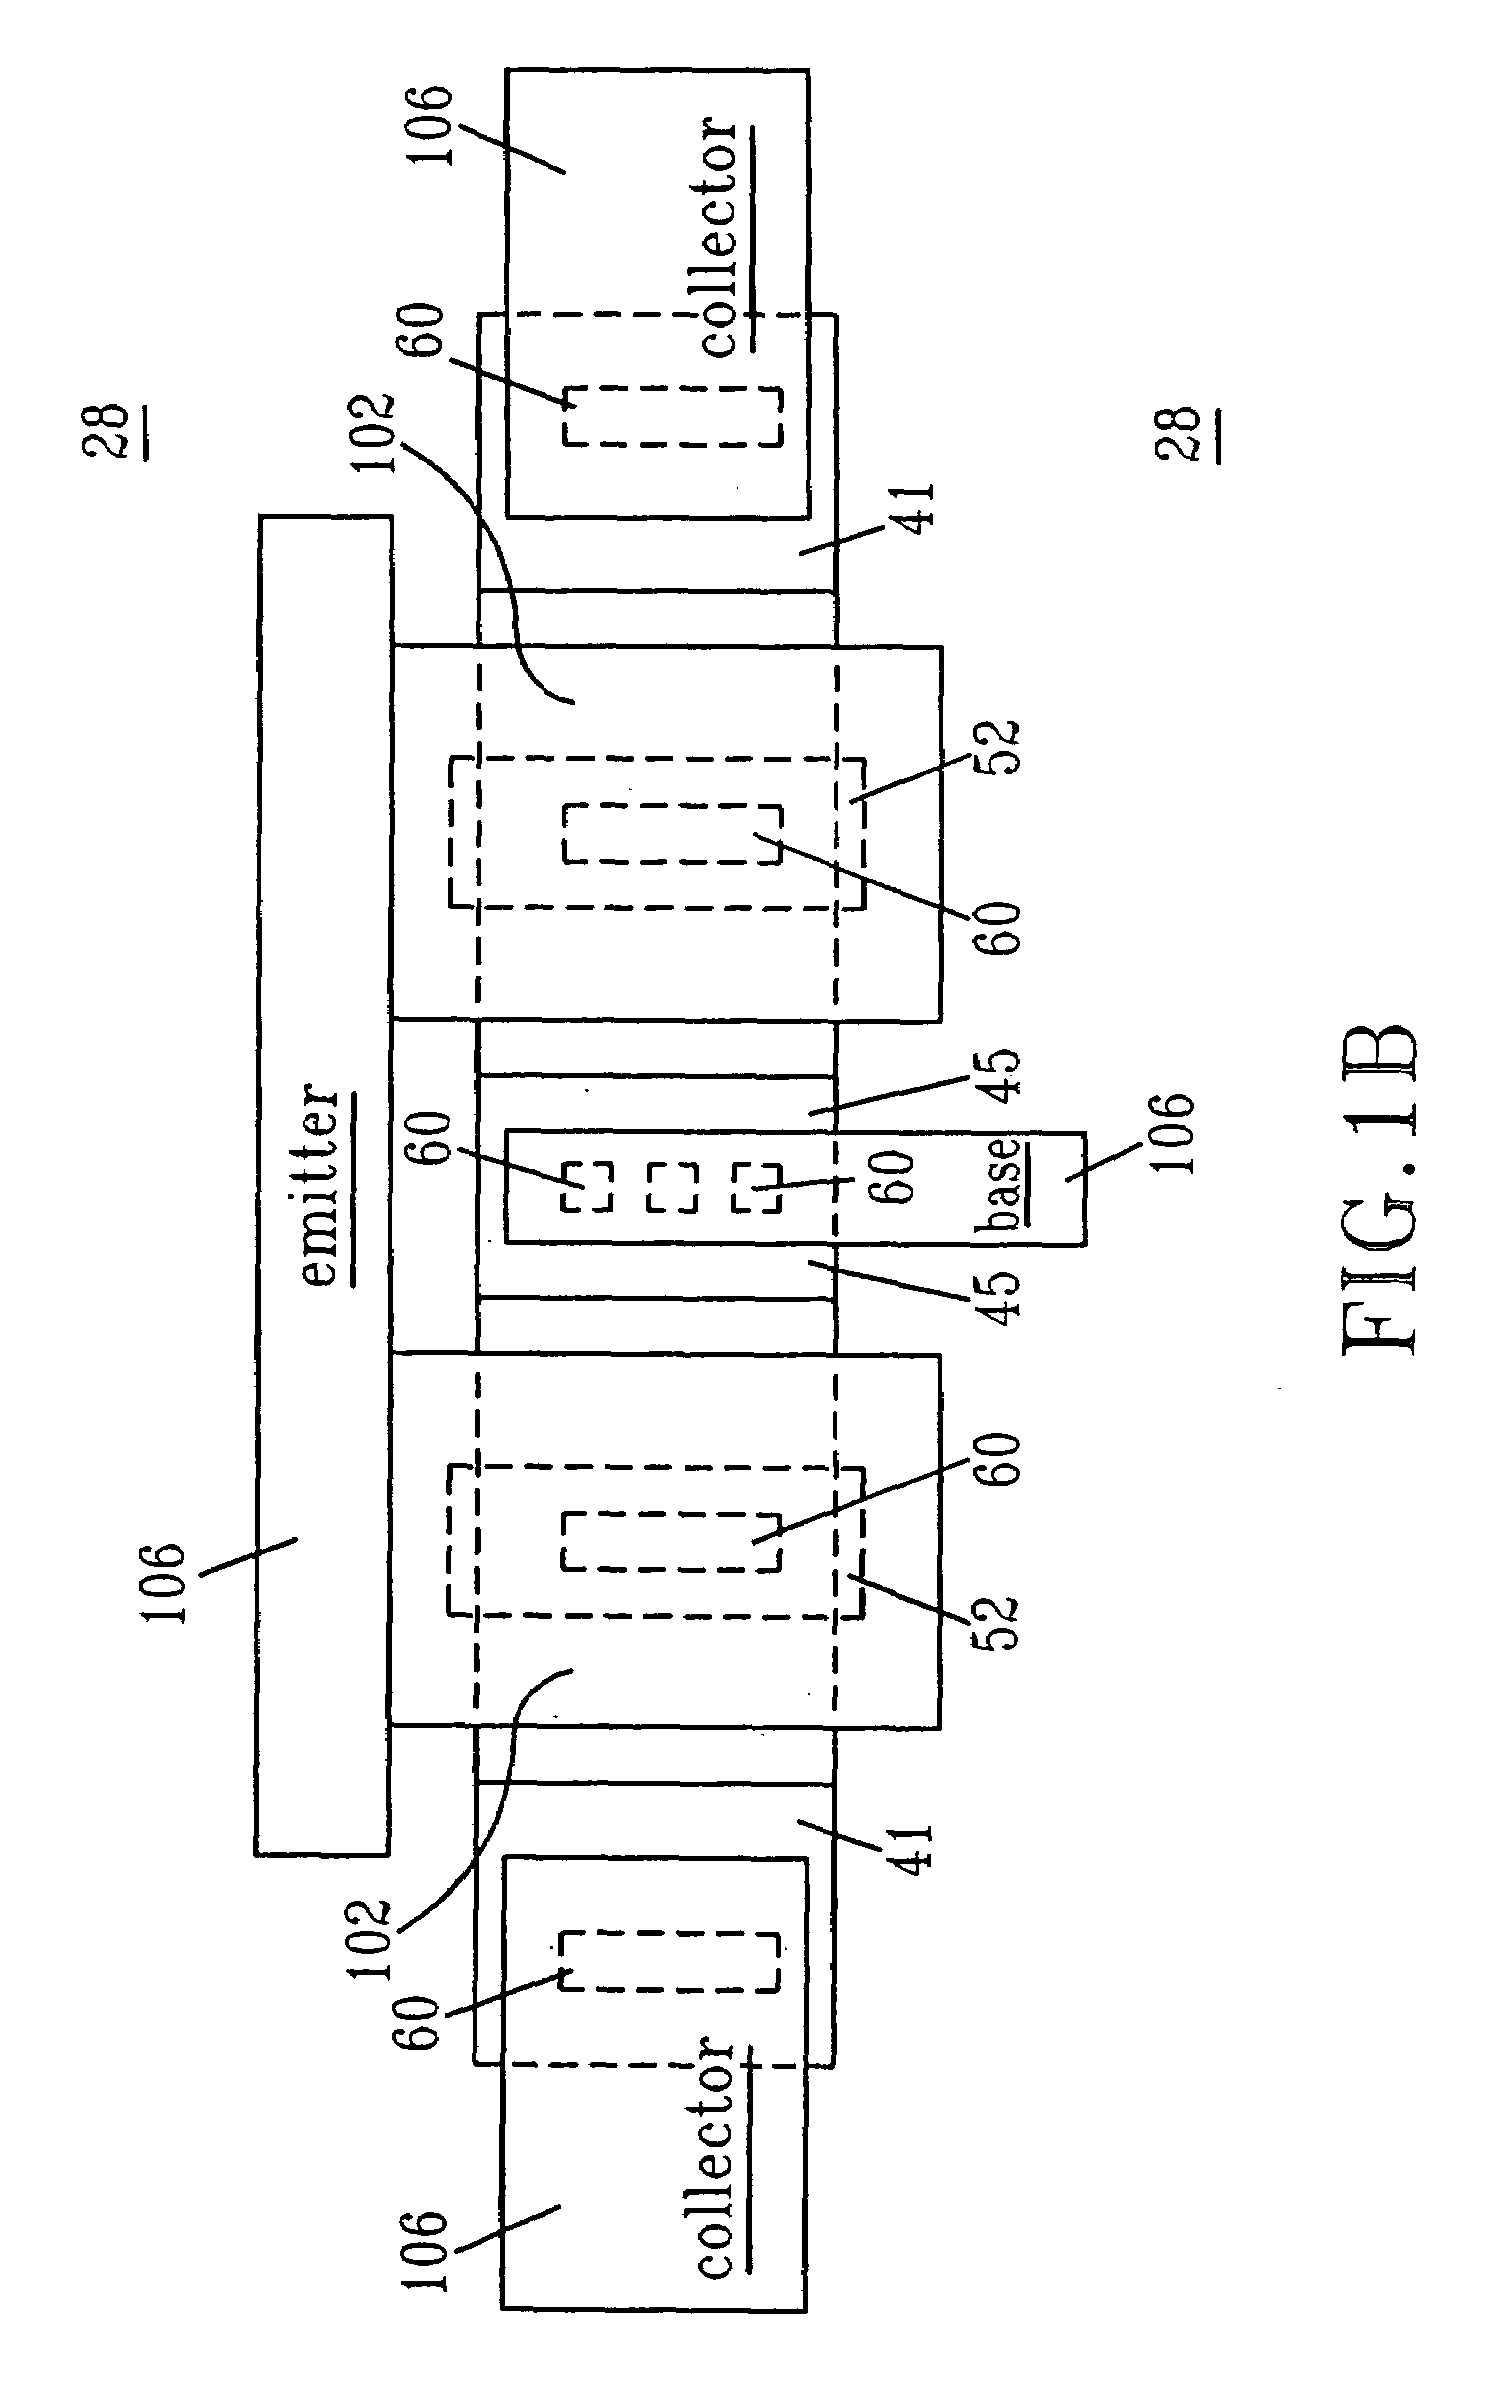 Ultra-thin SOI vertical bipolar transistors with an inversion collector on thin-buried oxide (BOX) for low substrate-bias operation and methods thereof